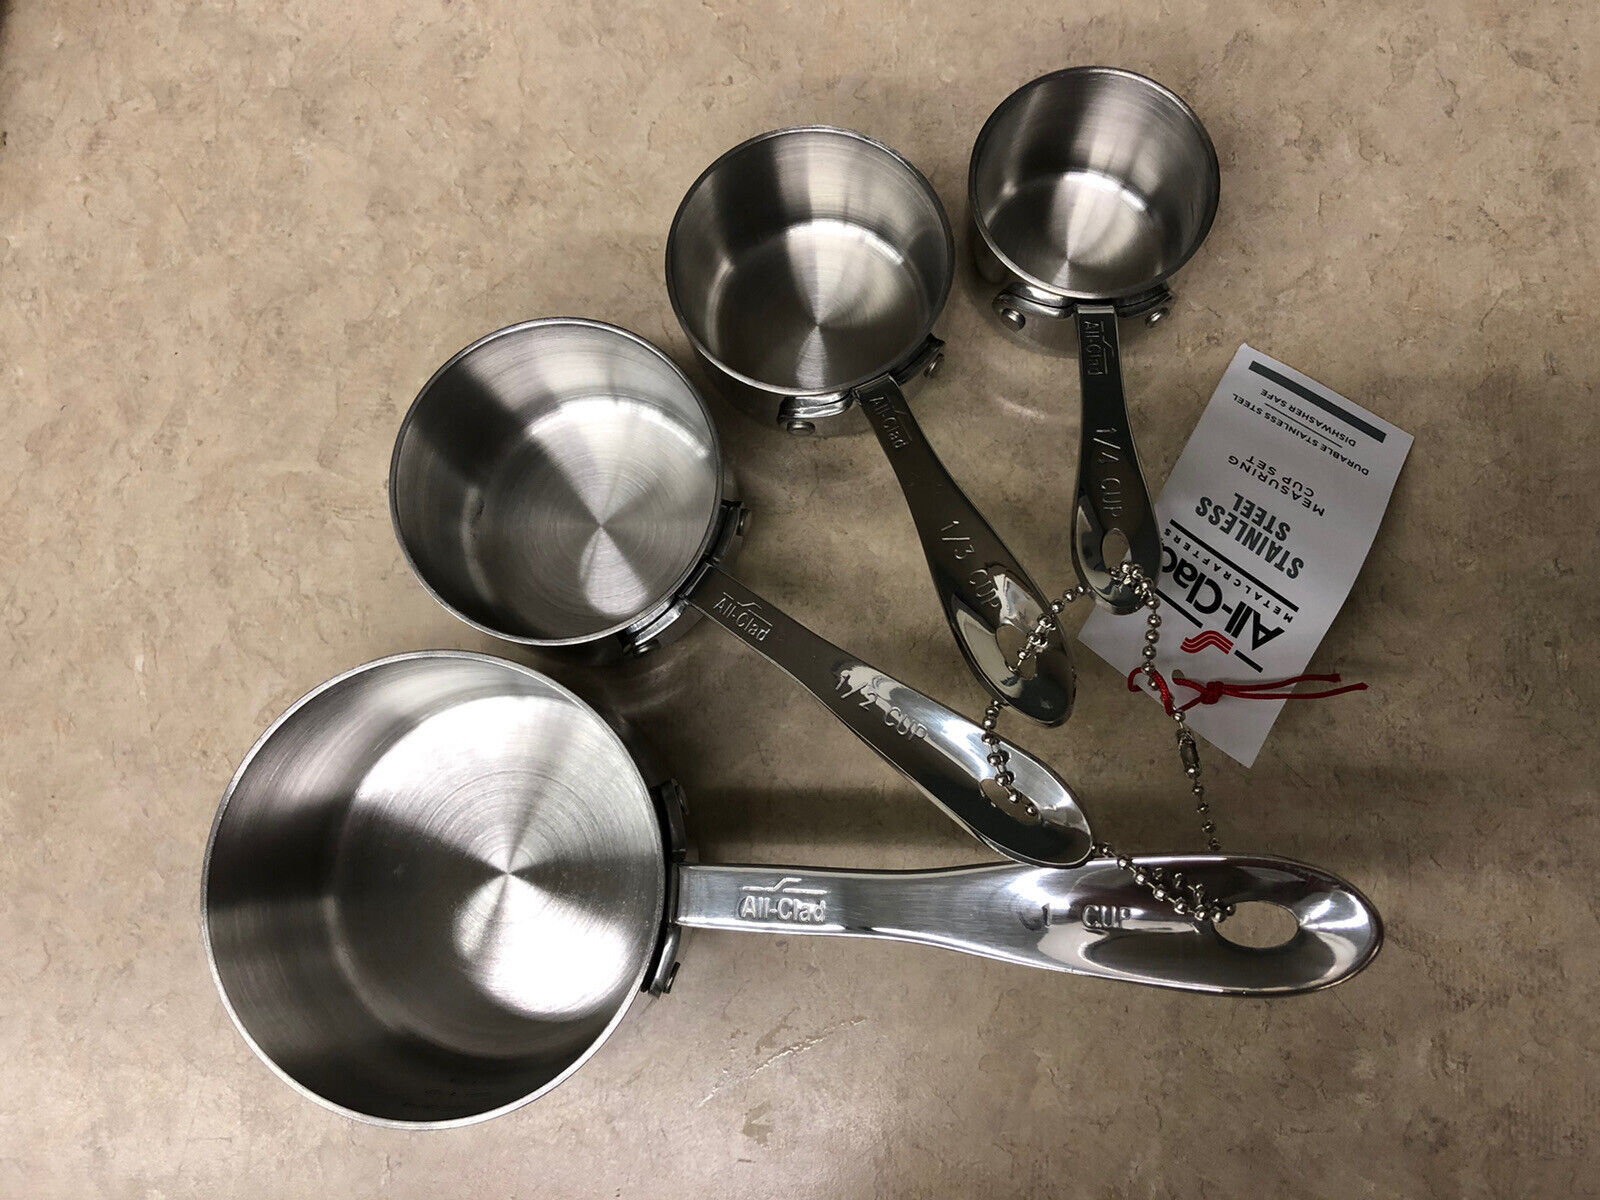 All-Clad Measuring Cup Set - 4 Piece Standard Size Stainless Steel